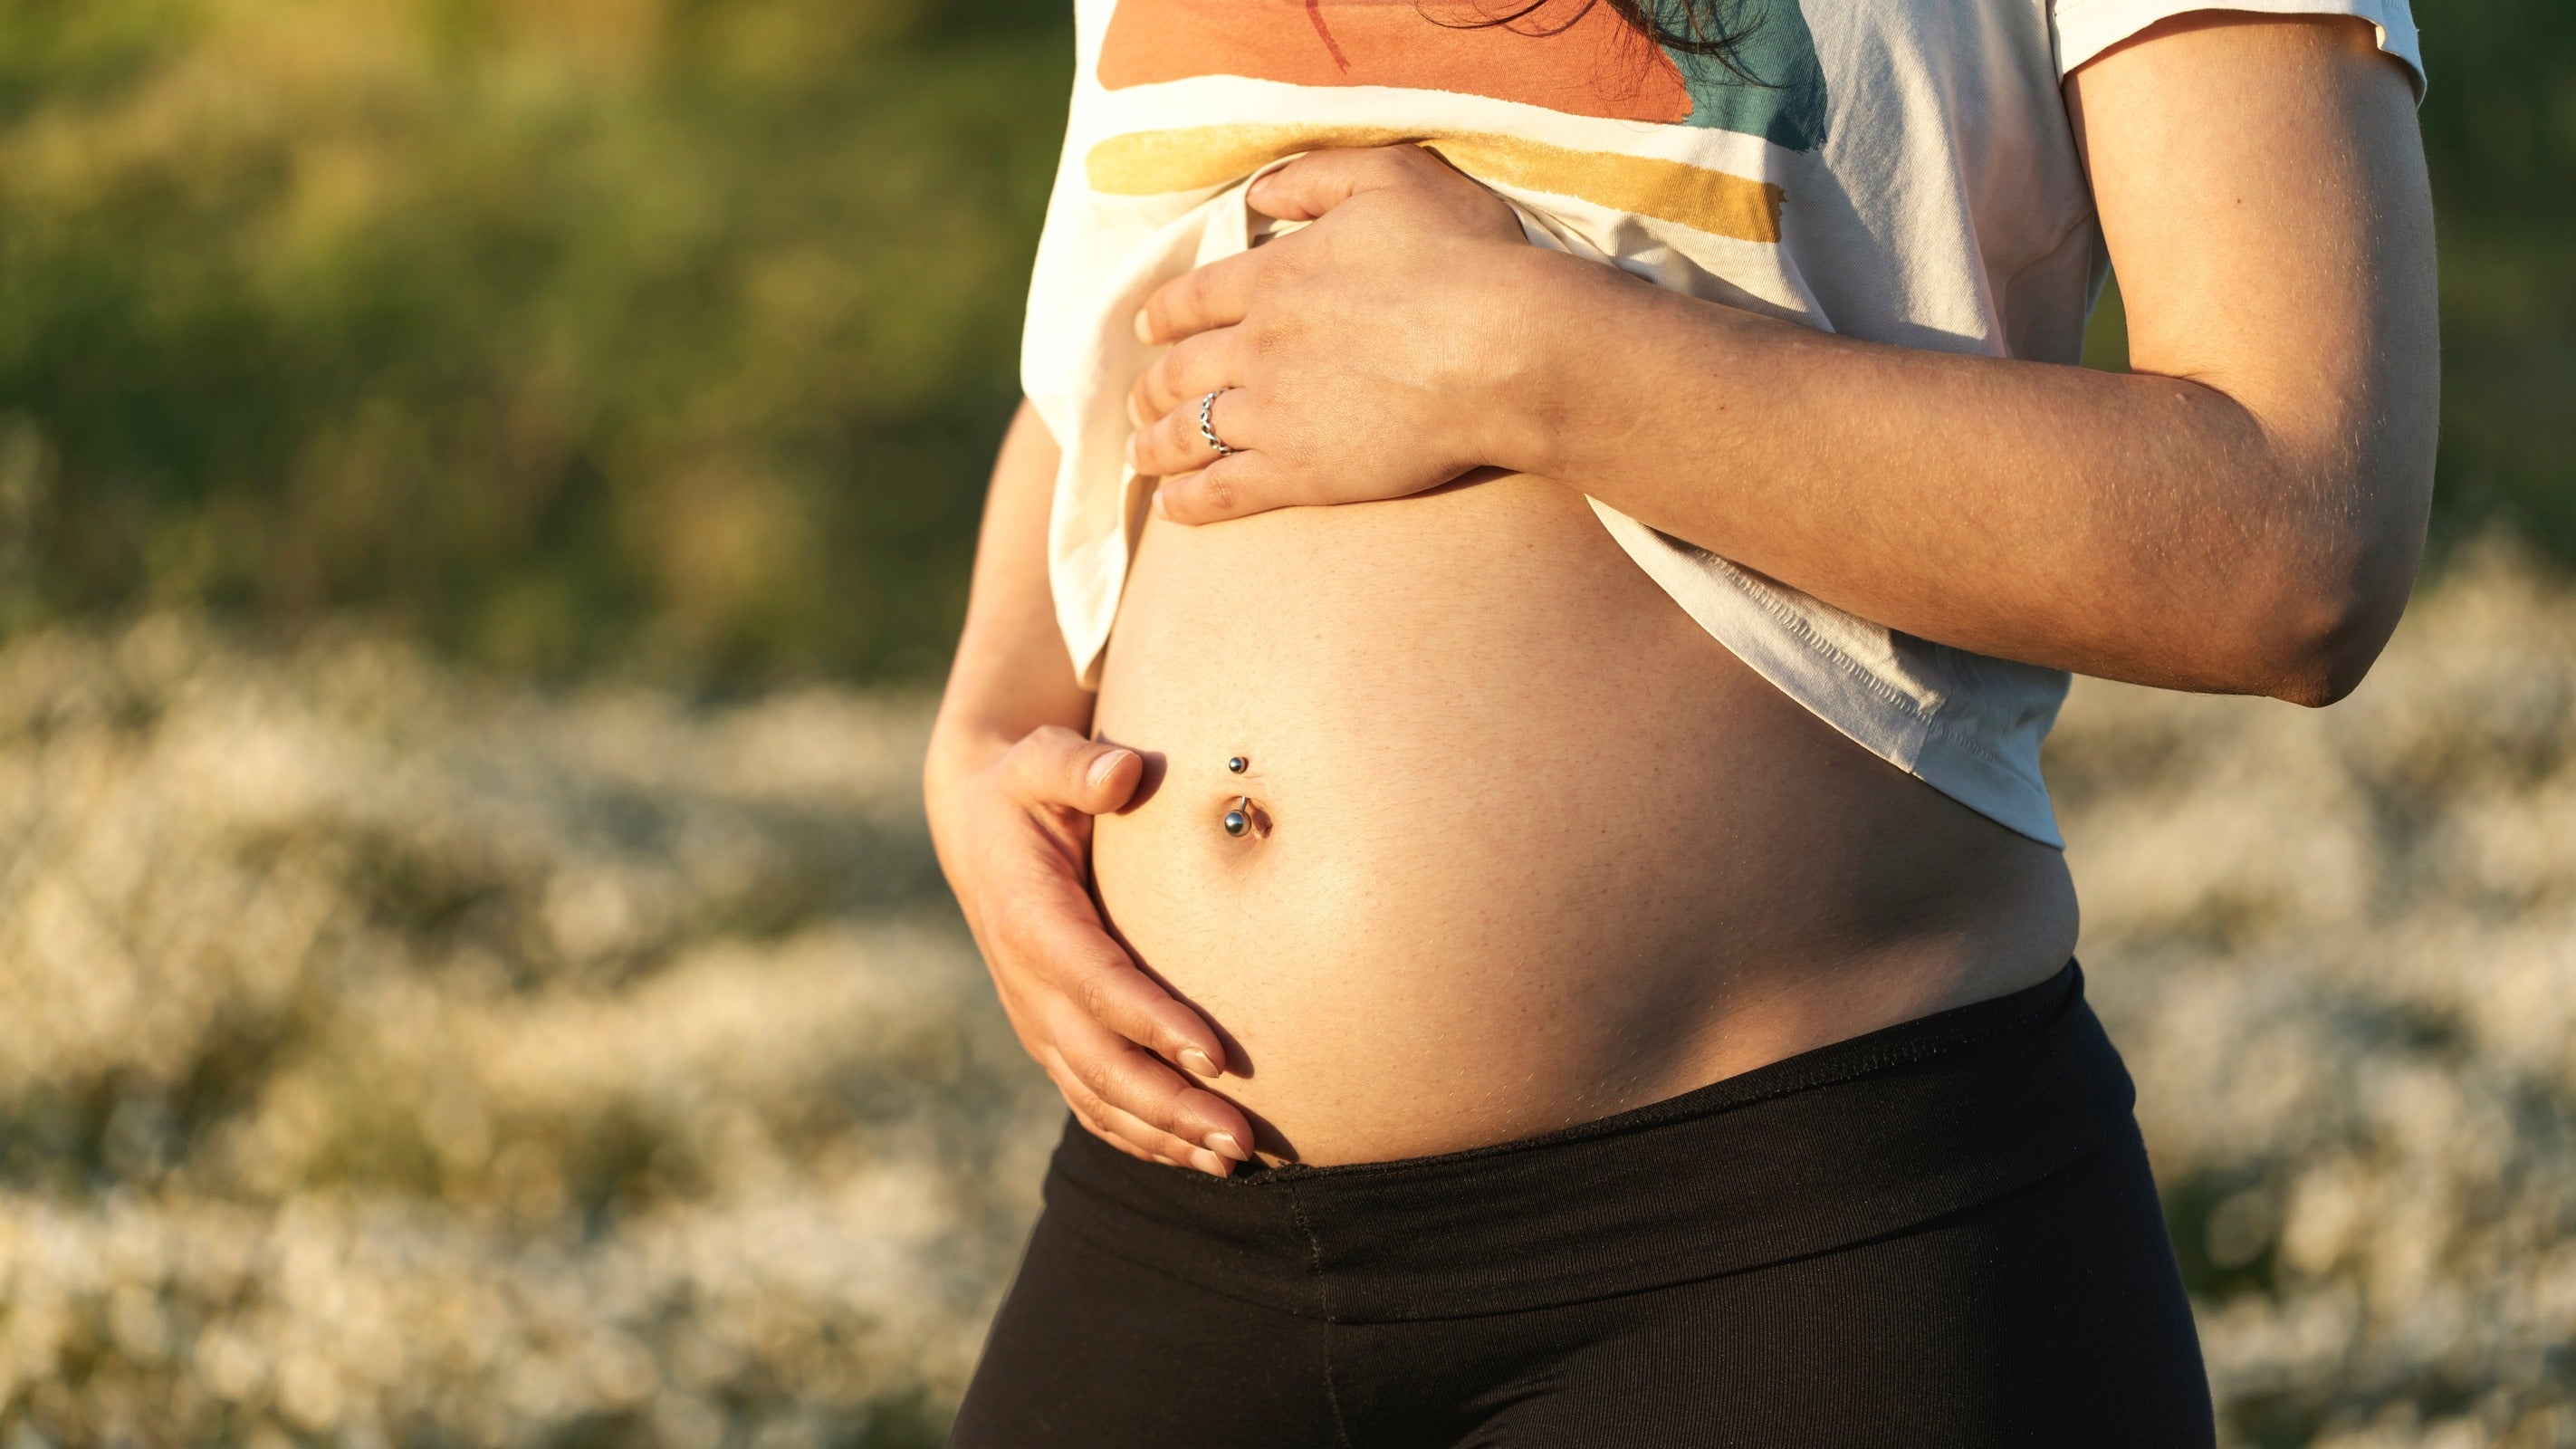 Pregnancy and Belly Button Piercing